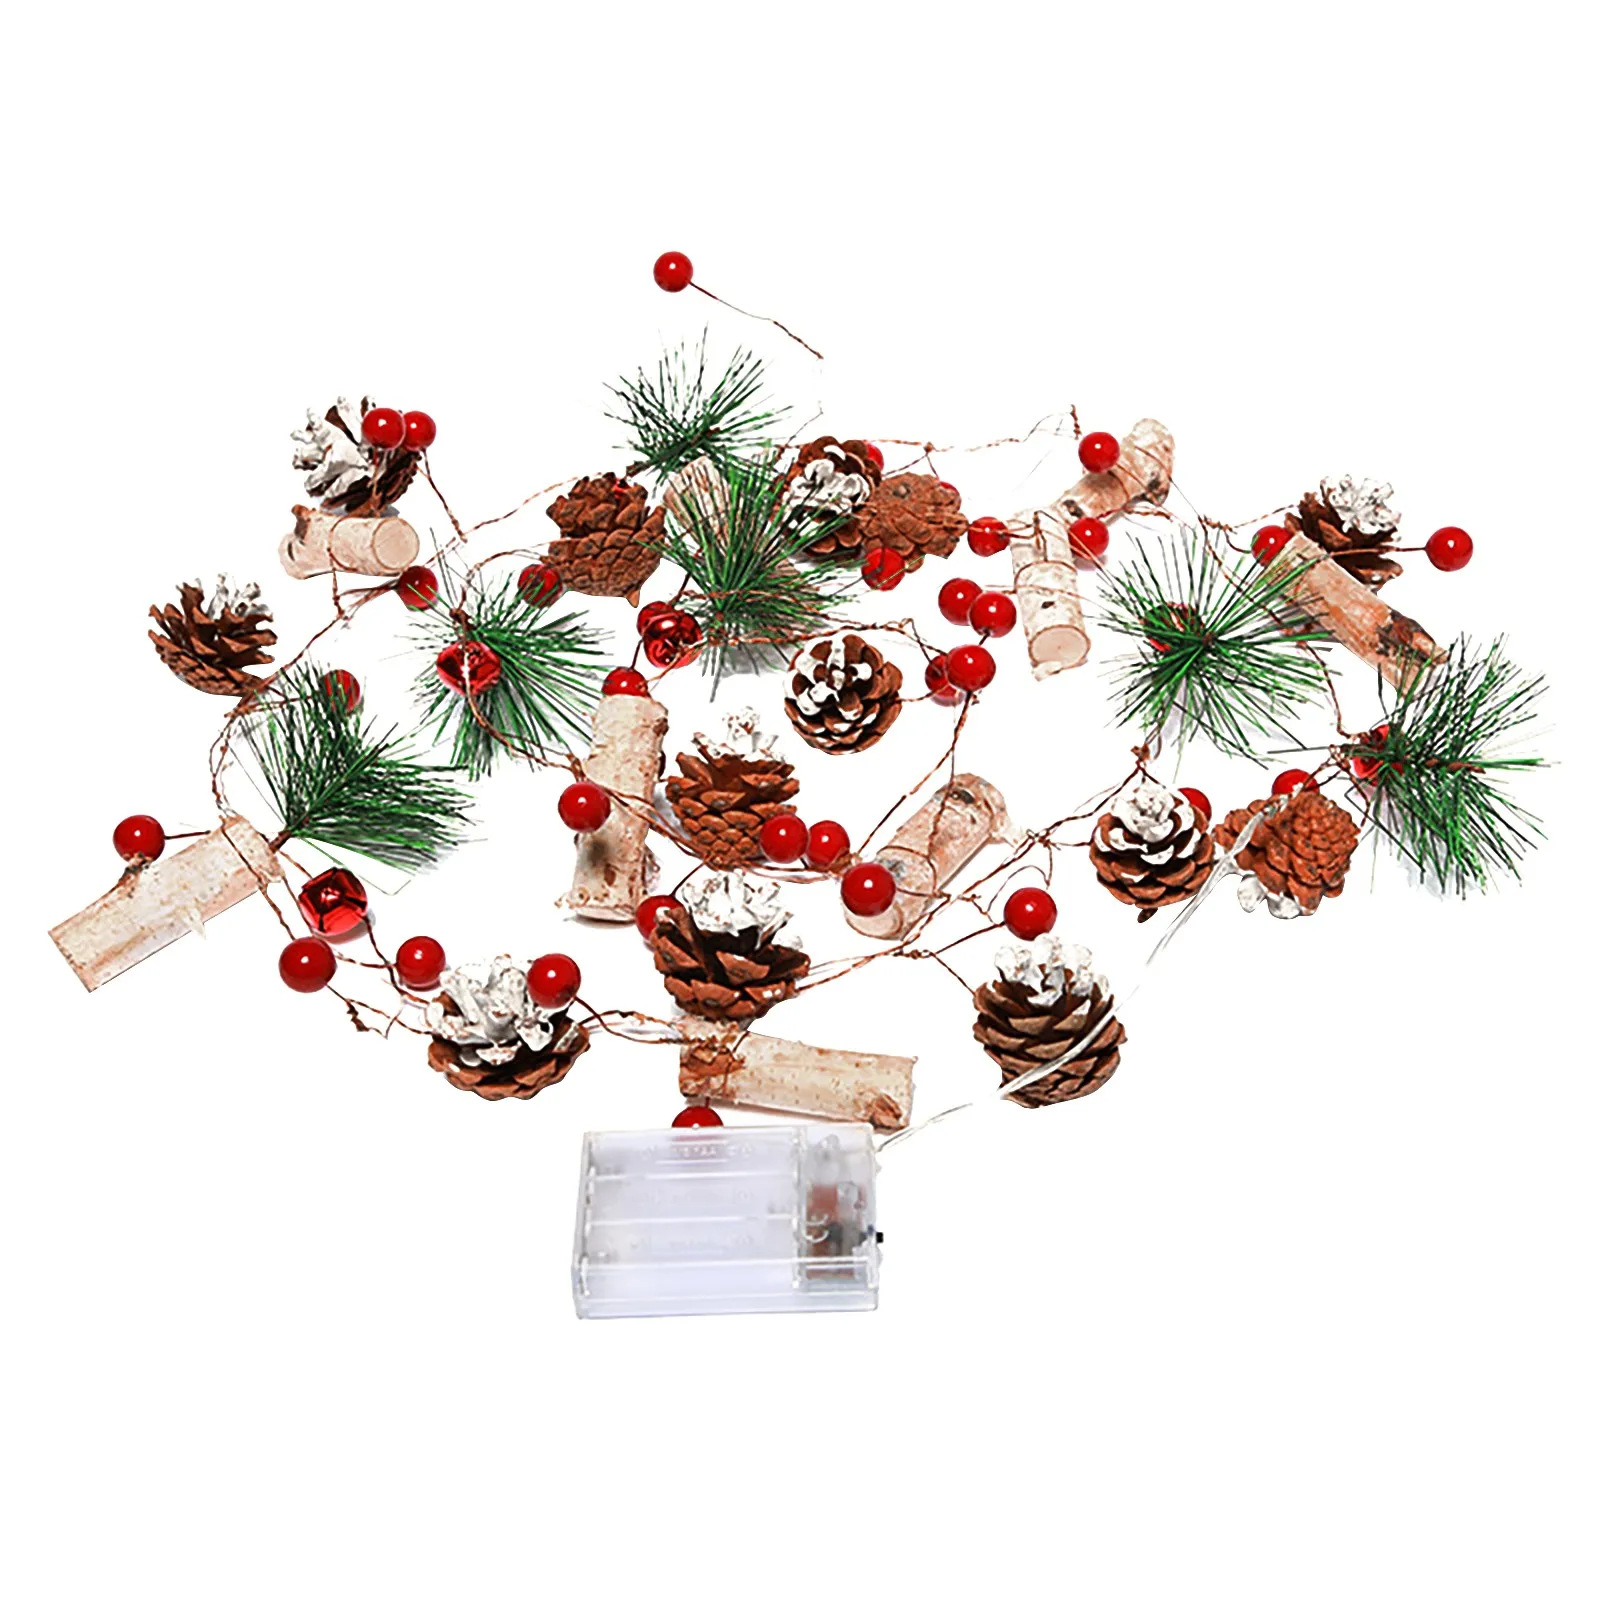 Hot Sale 2m Led Light String Christmas Trees Bell Pine-needle Copper Wir... - $163.28